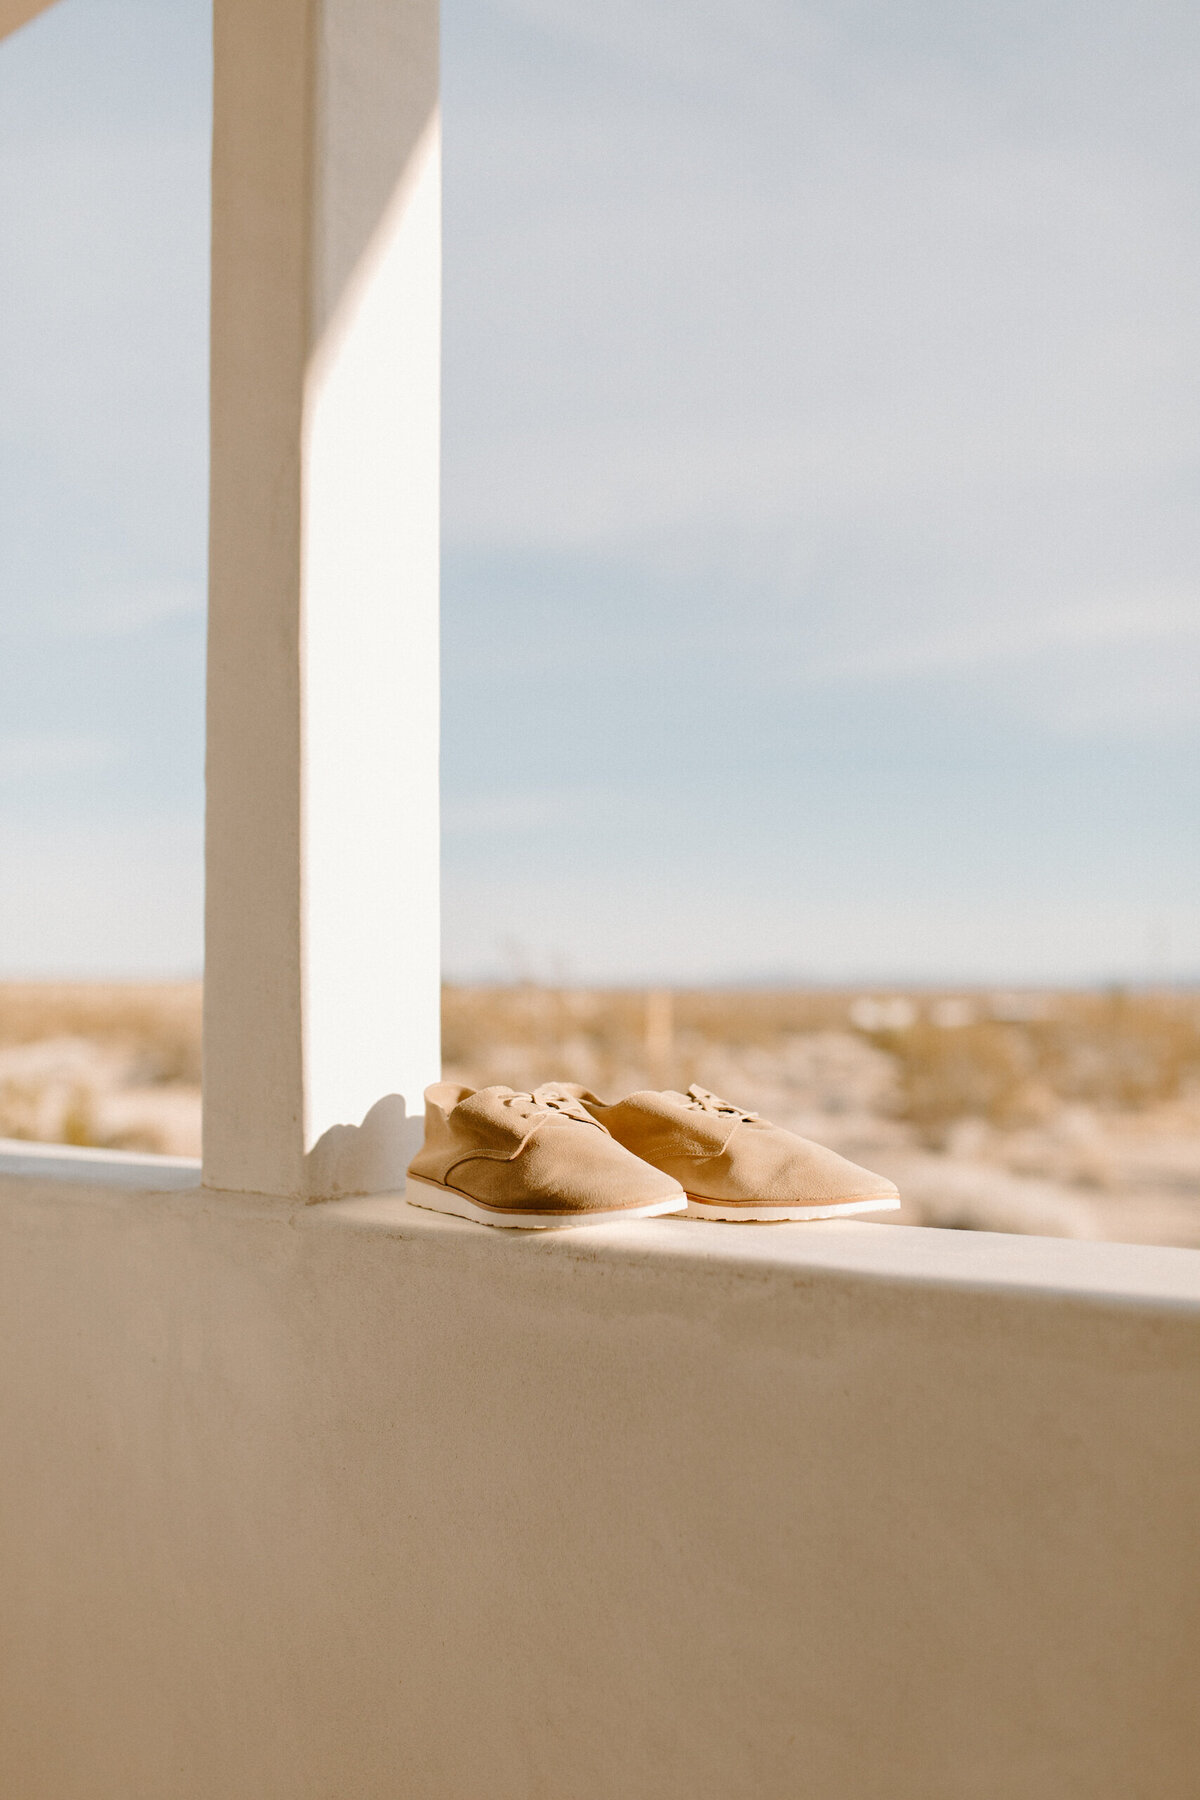 shoes on a ledge in the desert